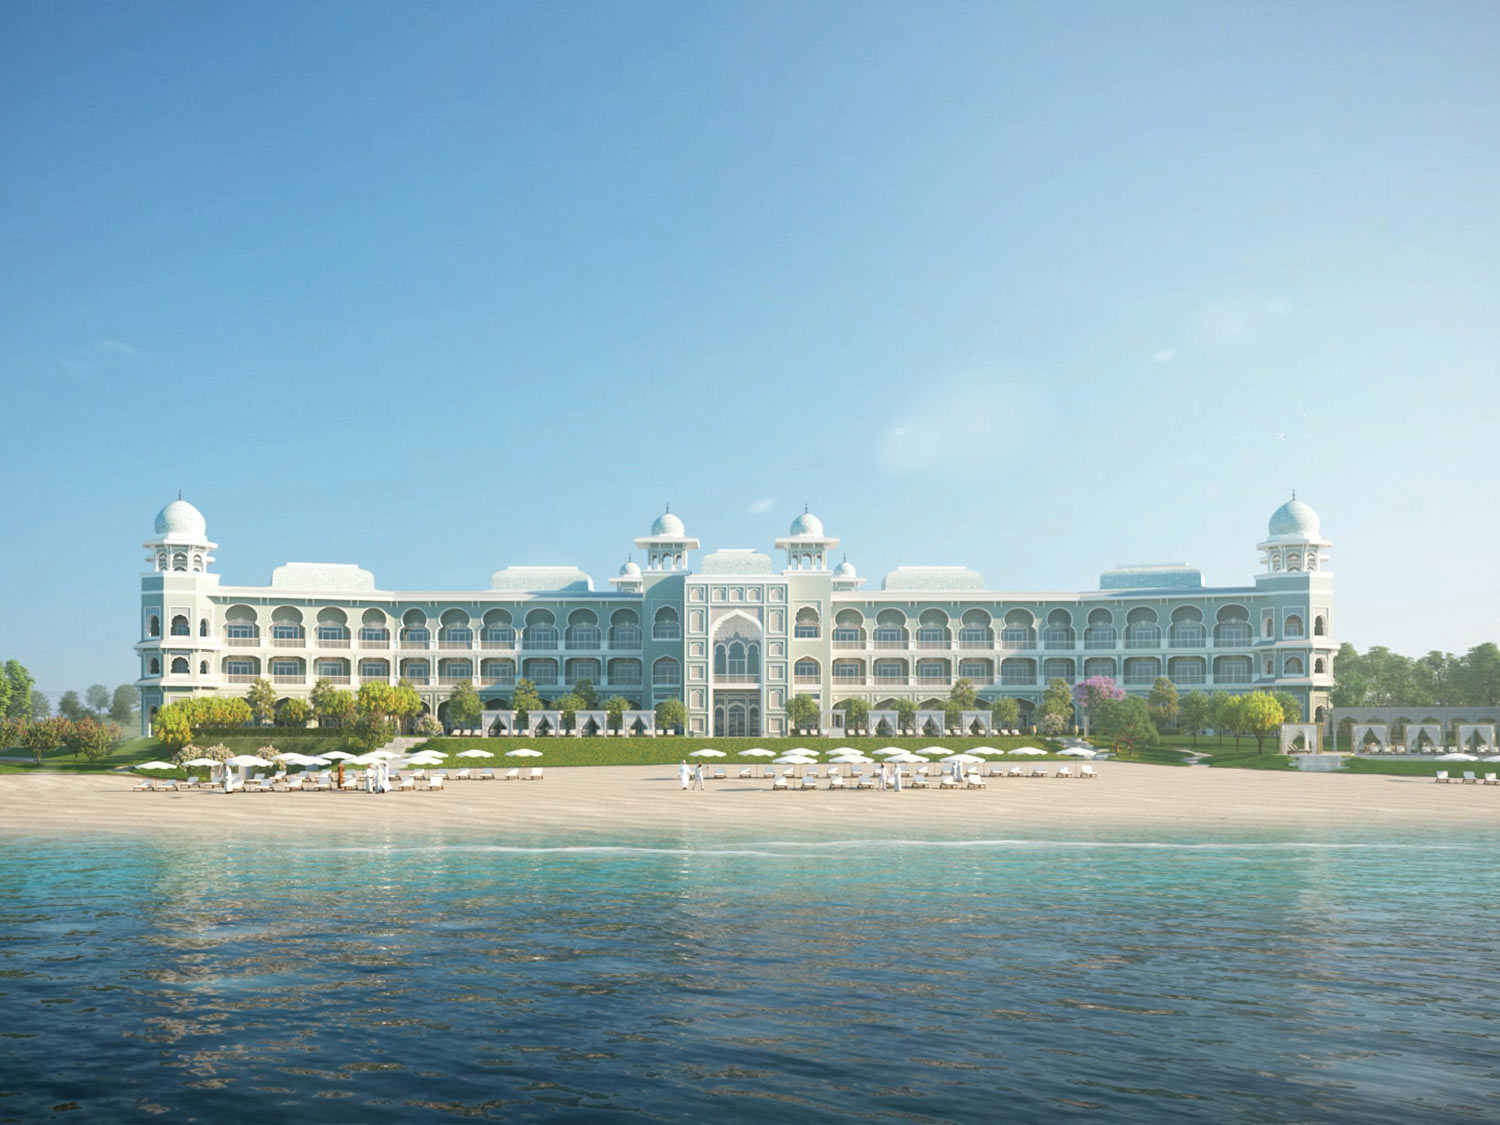 Elevating luxury, The Chedi Katara Hotel & Resort is set to deliver unprecedented excellence